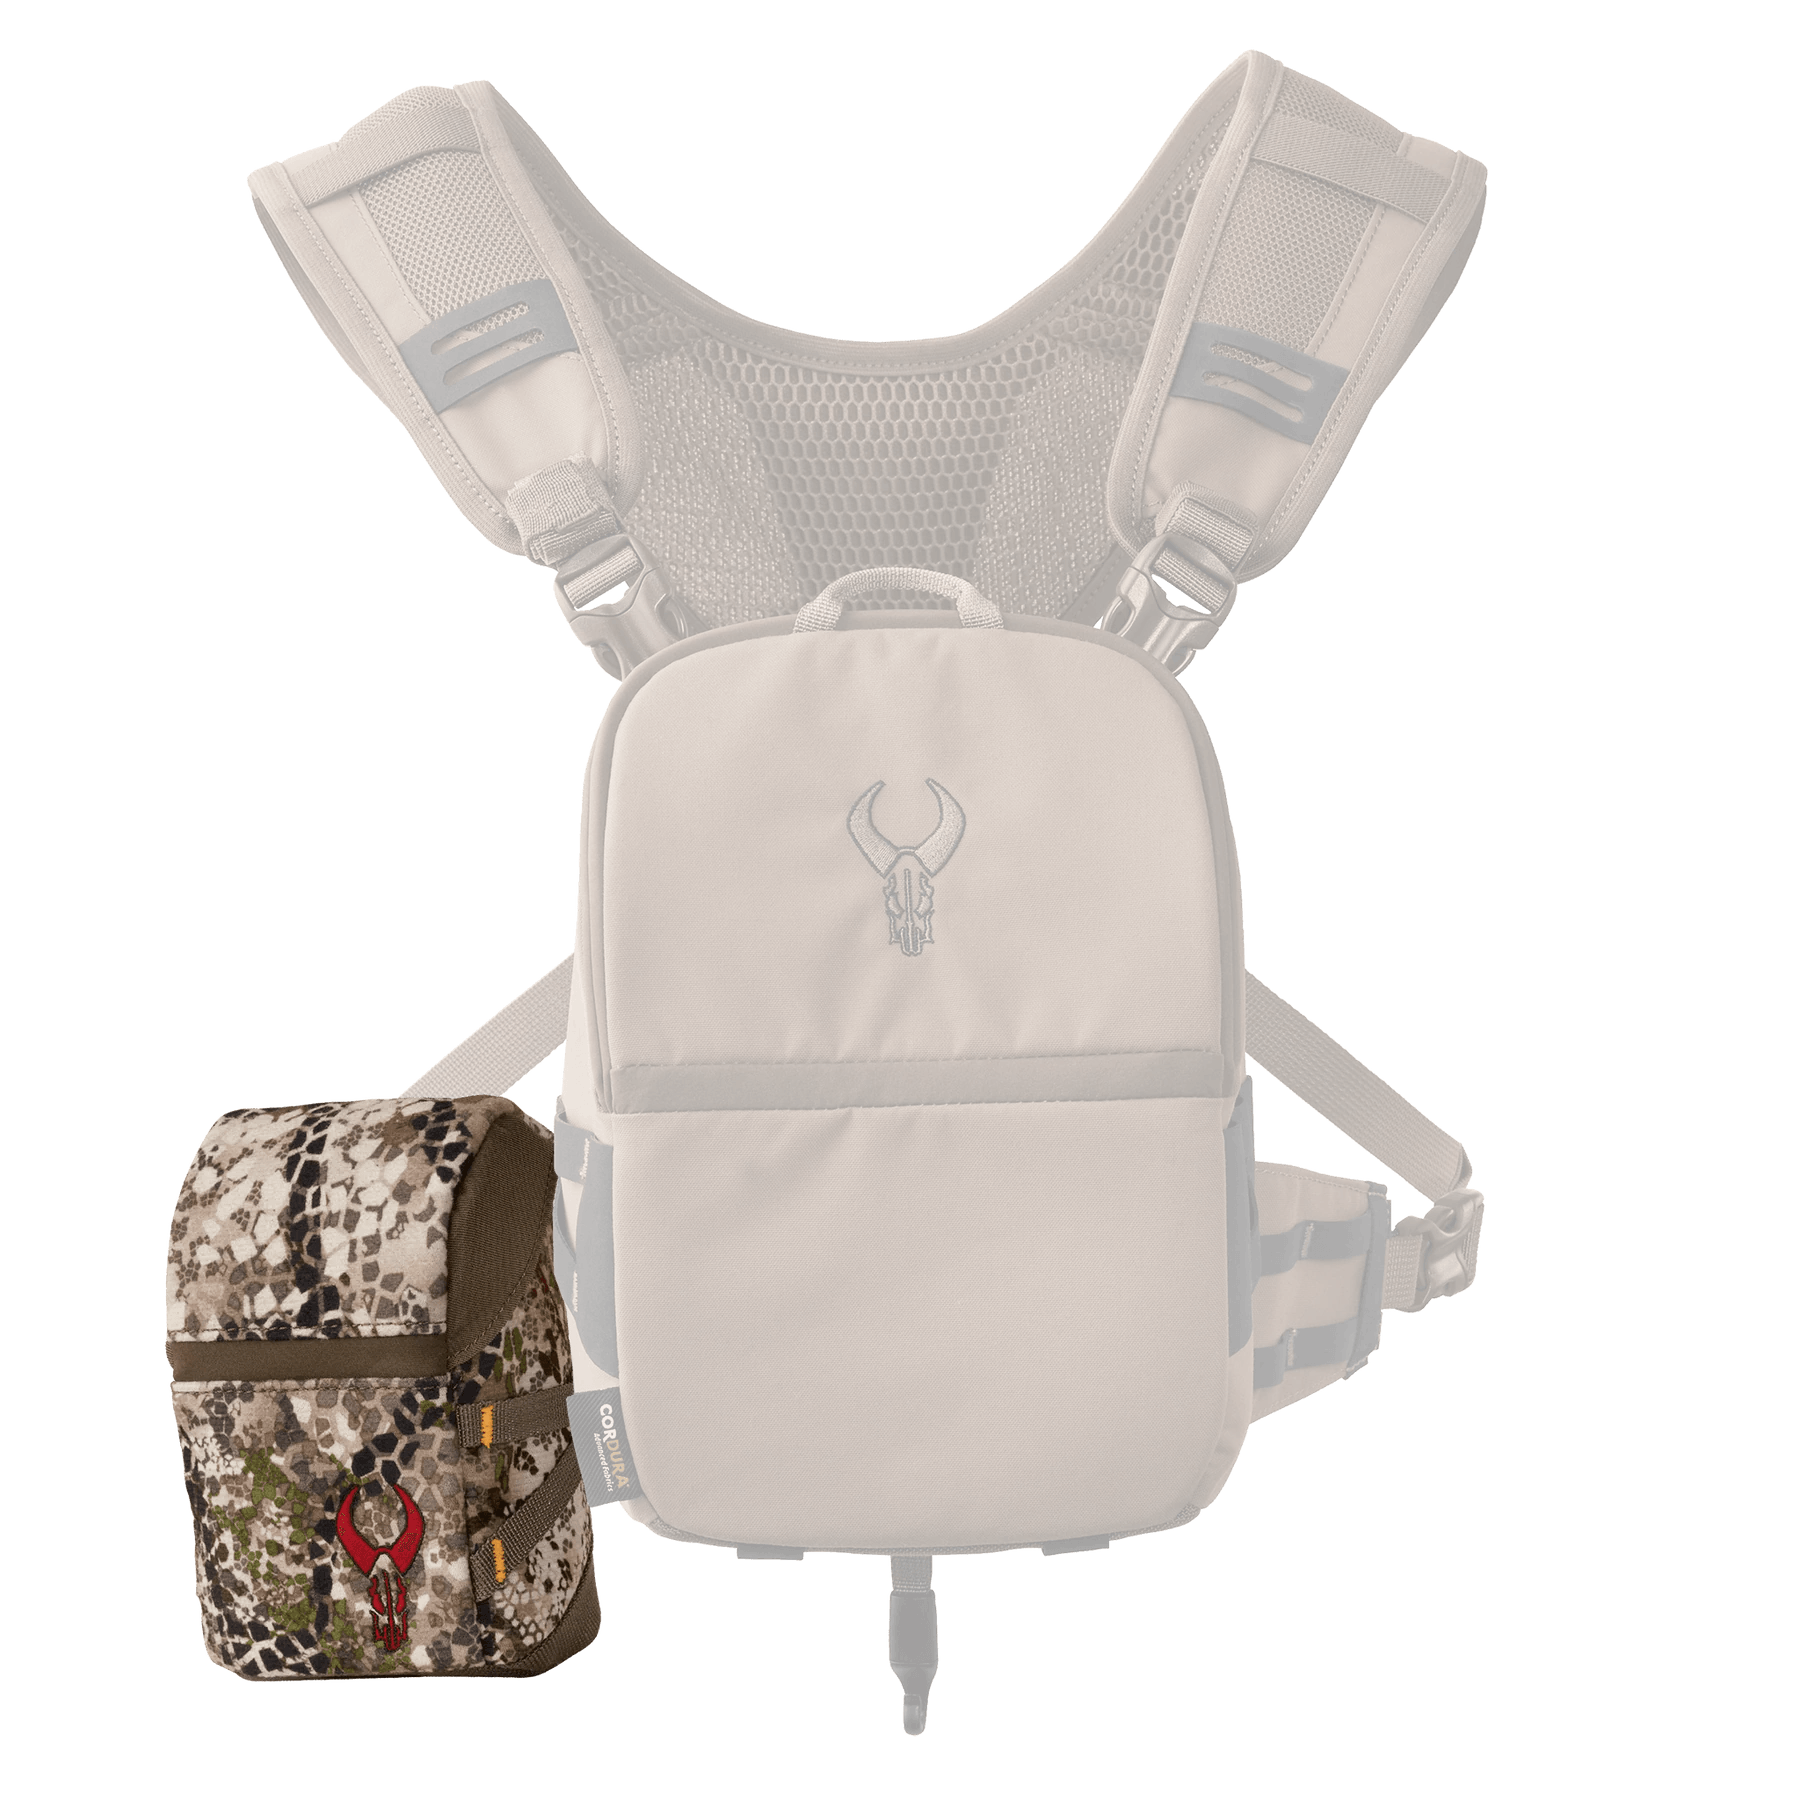 Badlands RF Mag Case - Leapfrog Outdoor Sports and Apparel